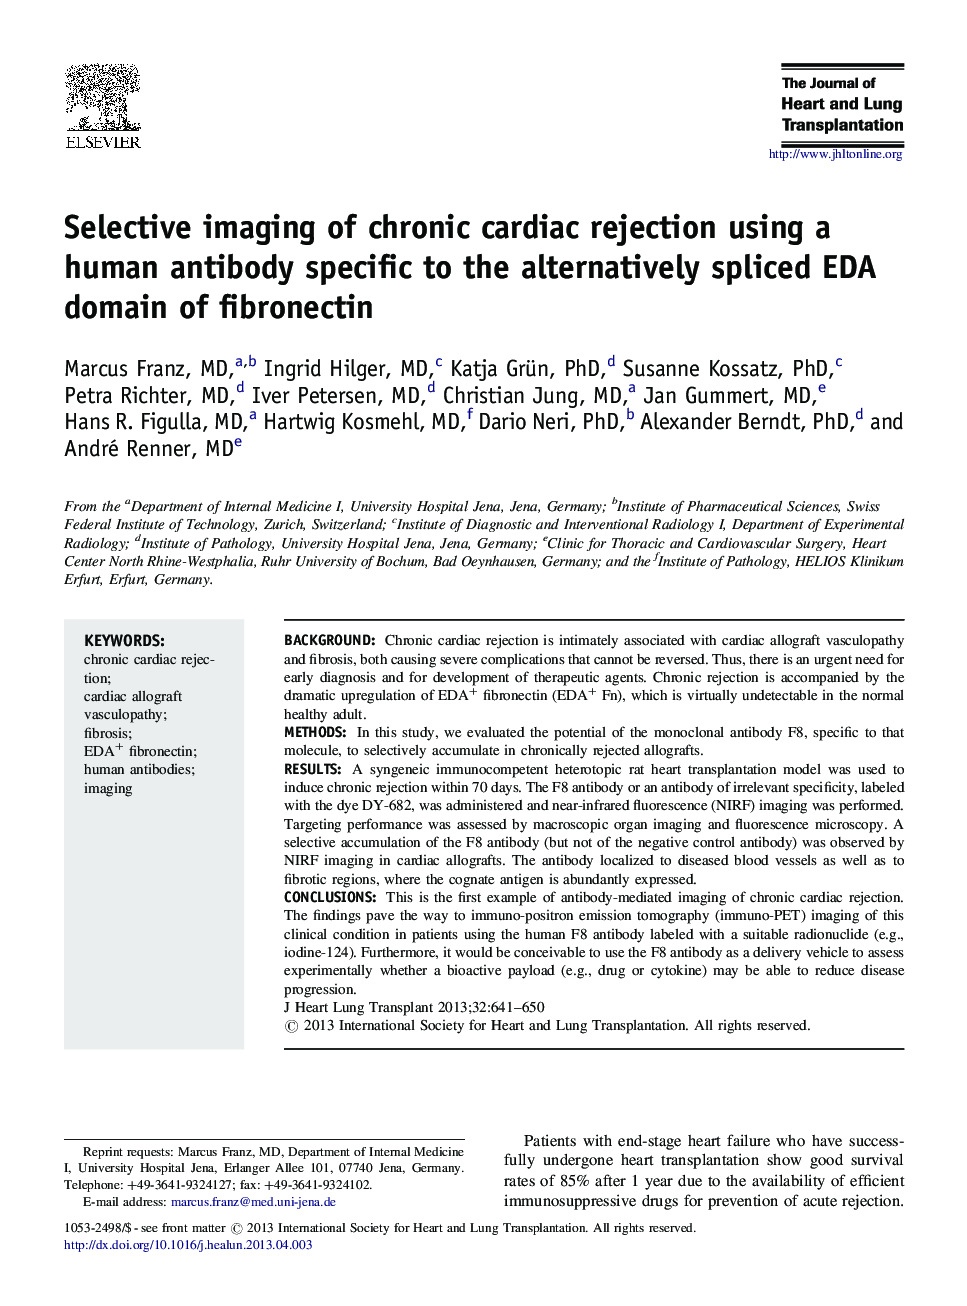 Selective imaging of chronic cardiac rejection using a human antibody specific to the alternatively spliced EDA domain of fibronectin